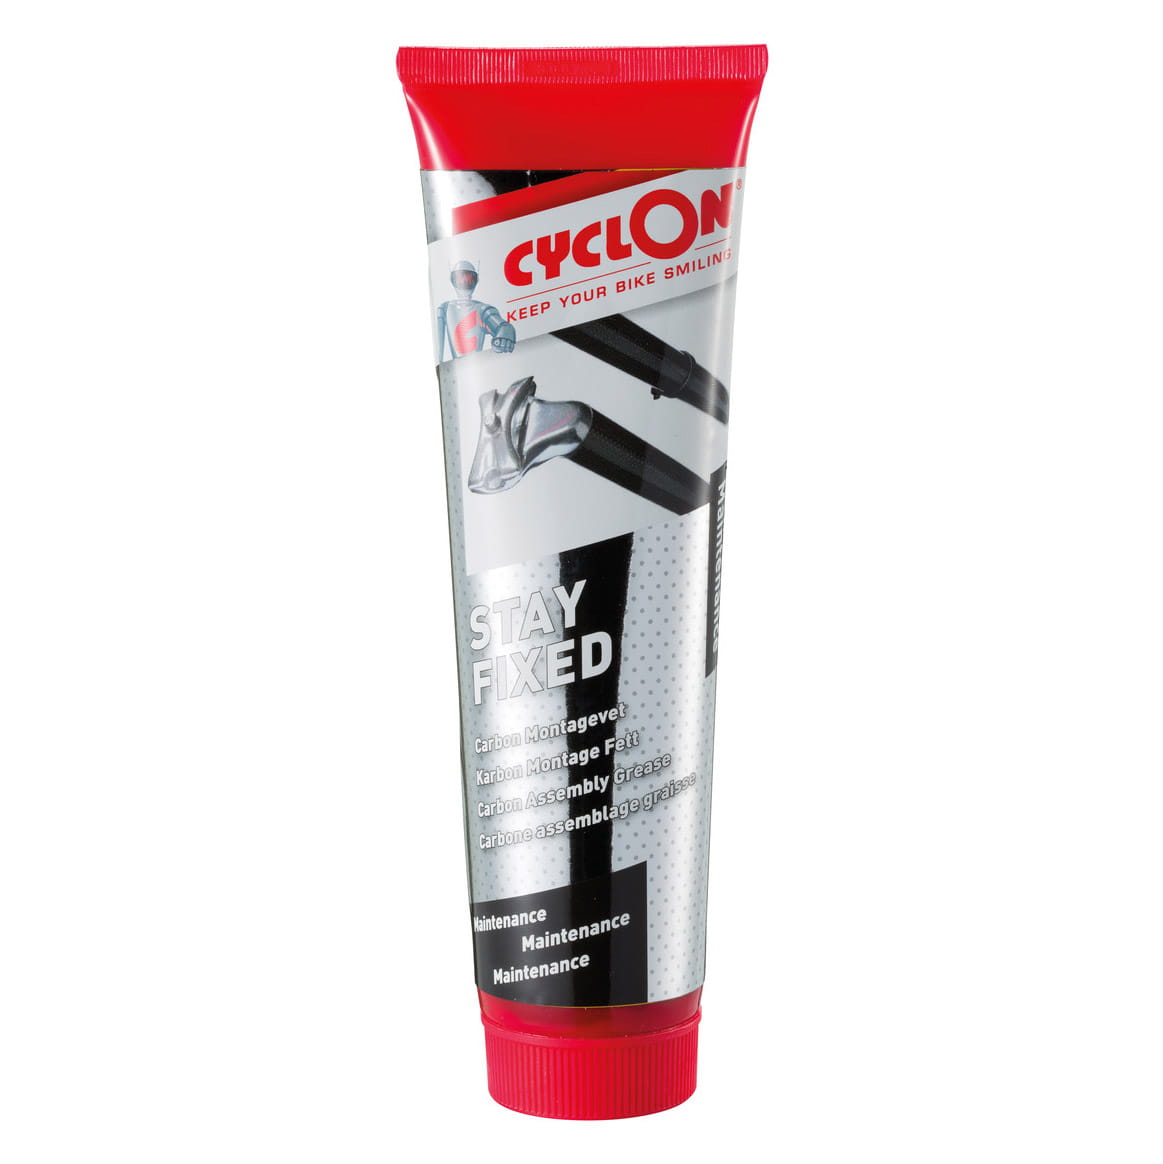 Cyclon Stay Fixed Carbon Montagepaste Bike / MTB 150 ml